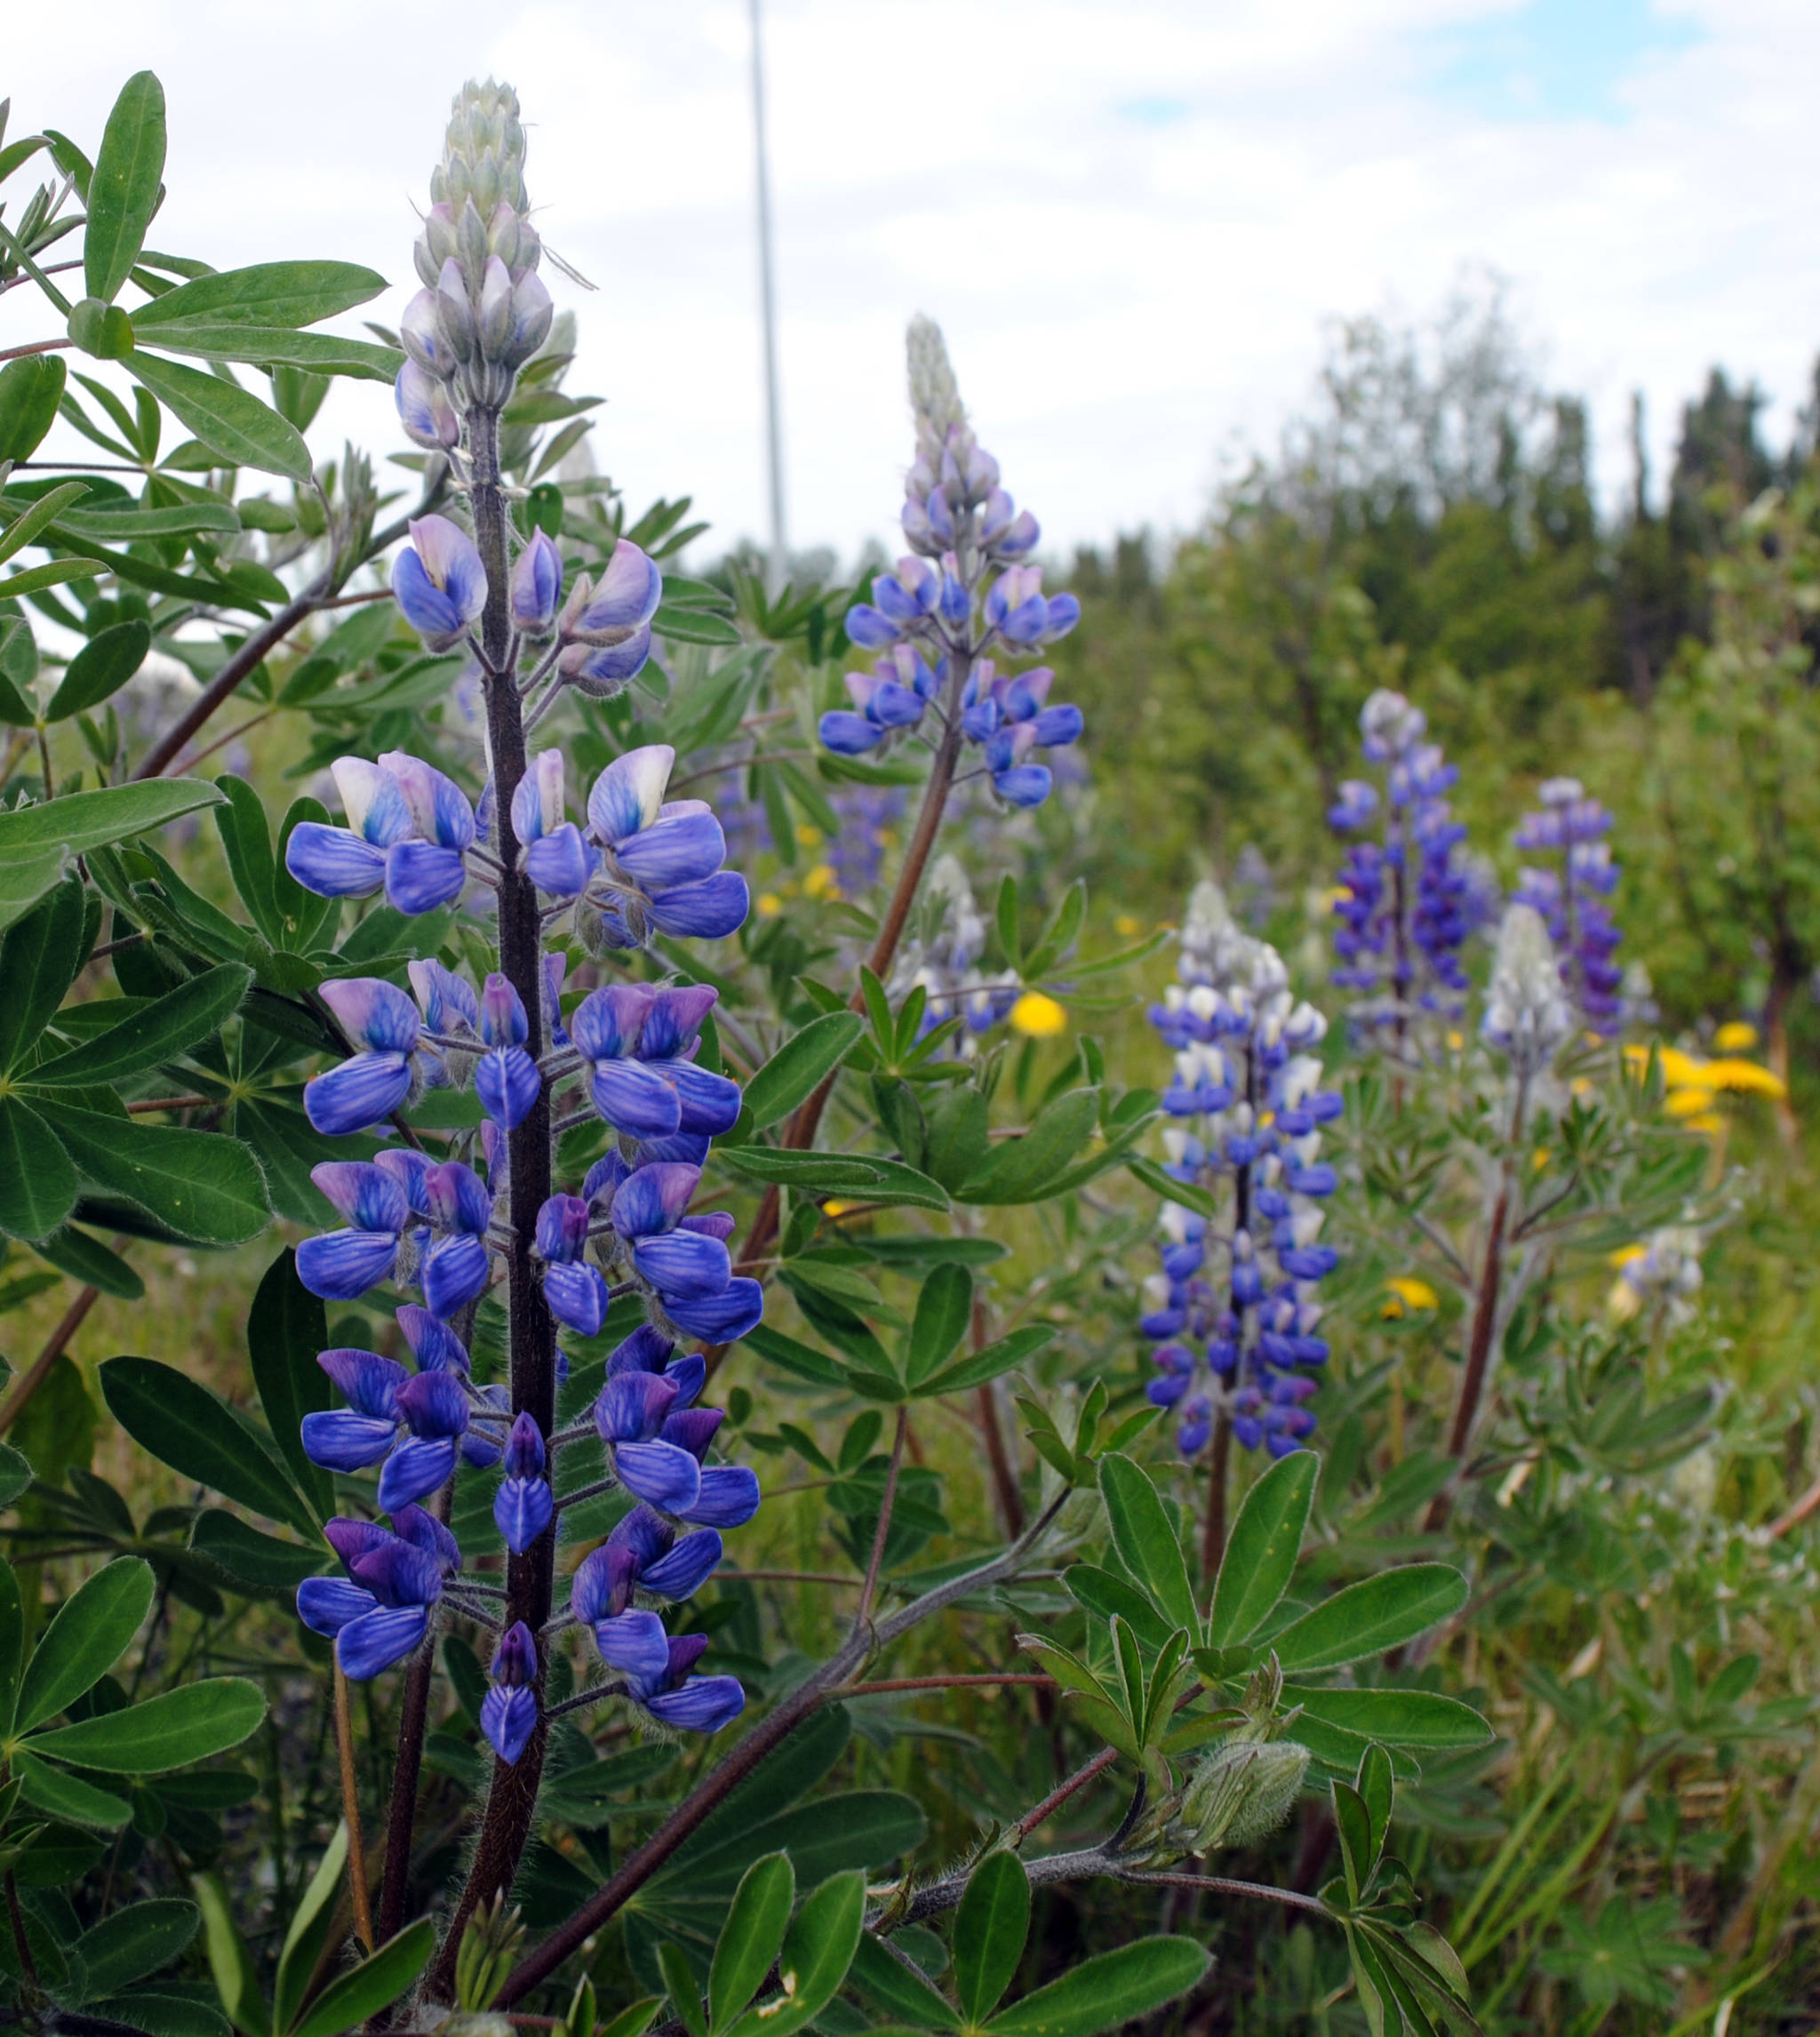 Lupine flowers grow bloom along the Kenai Spur Highway on Tuesday. A wide array of wildflower species can be found throughout the Kenai Peninsula. (Photo by Kat Sorensen/Peninsula Clarion)